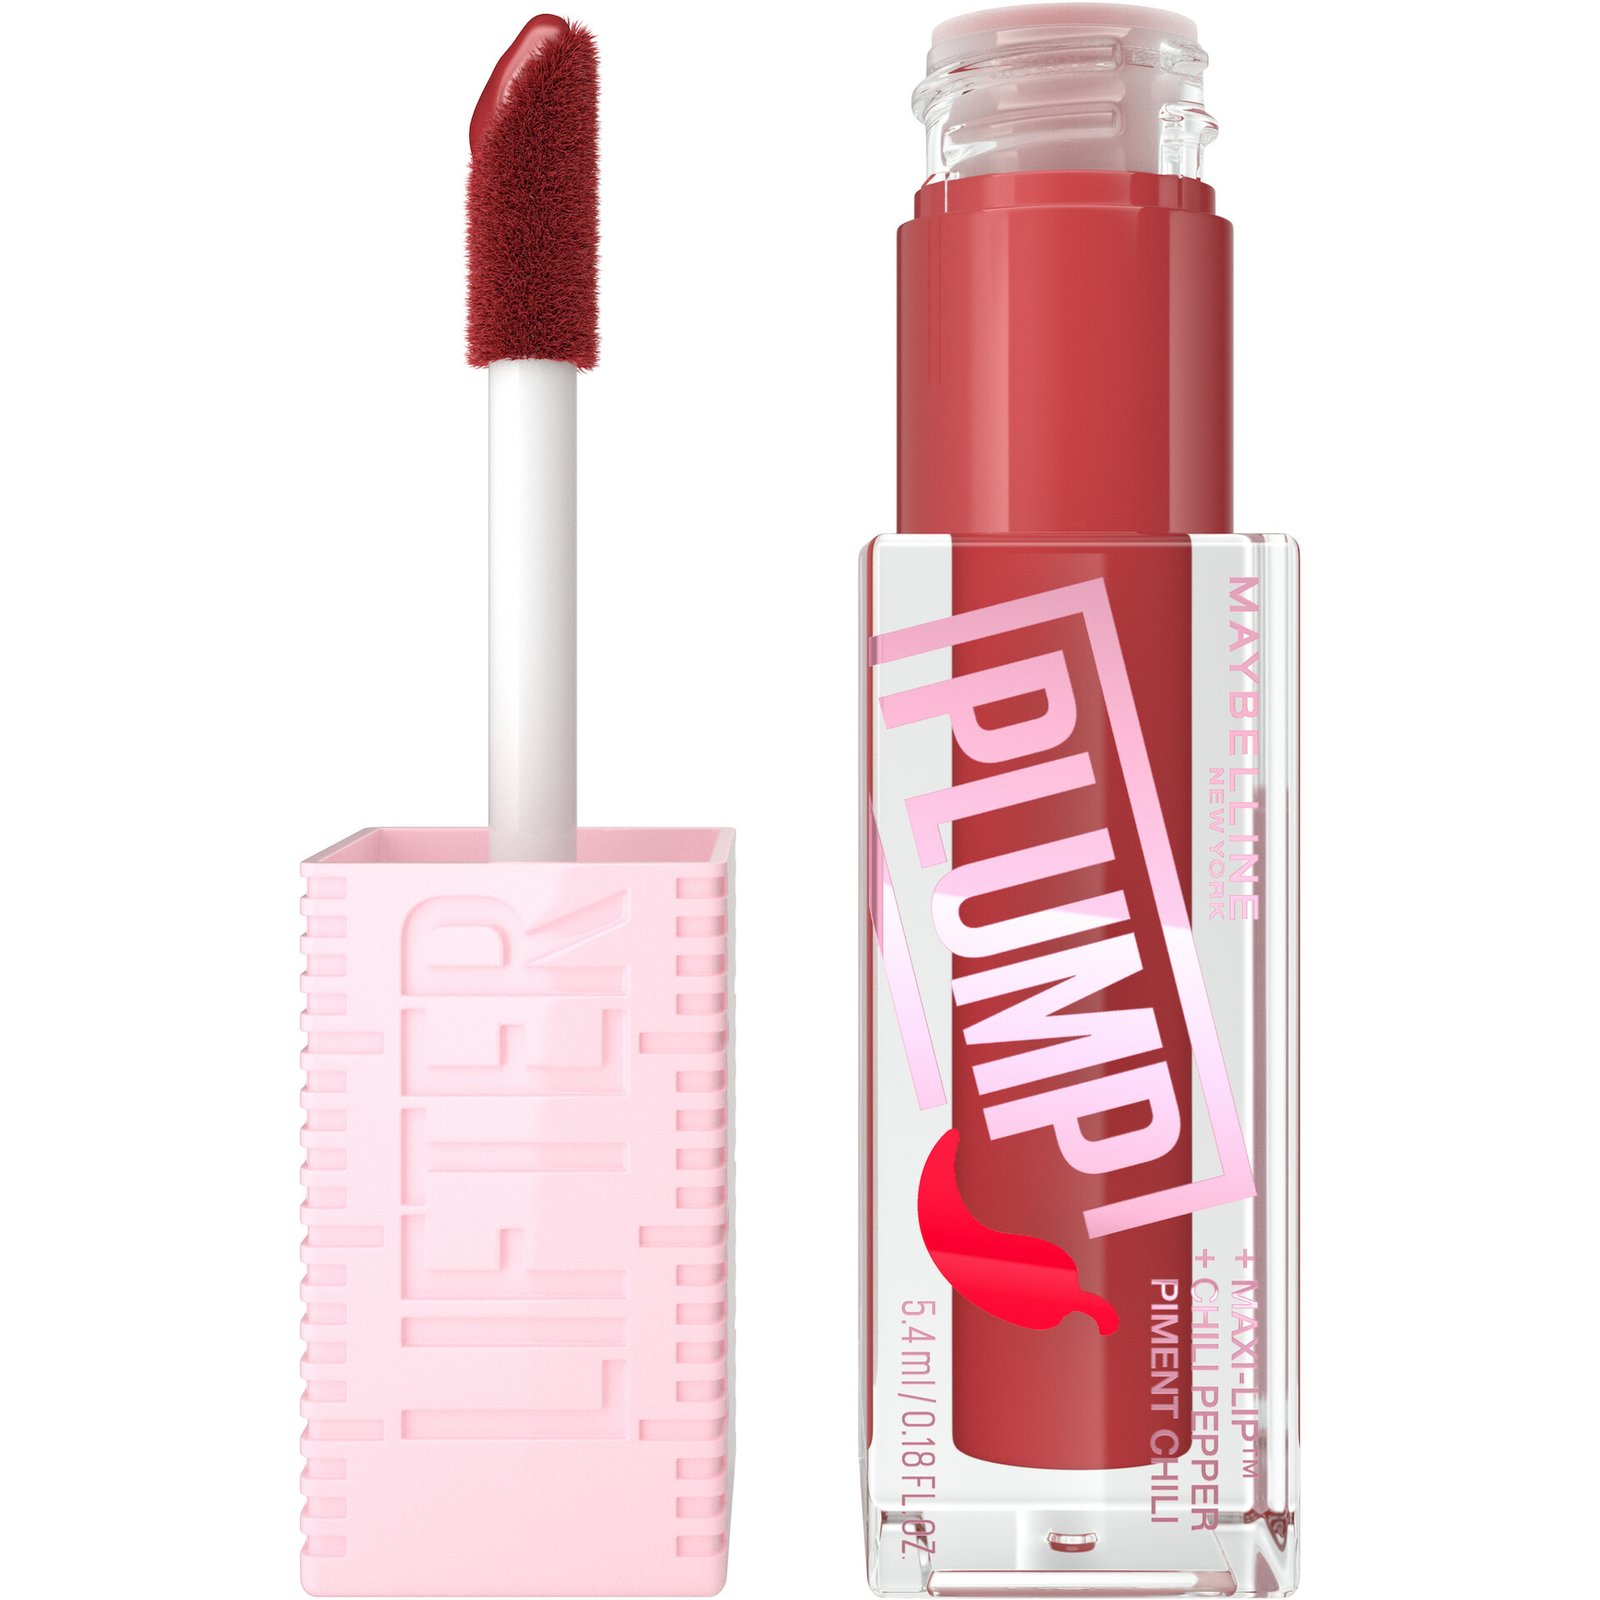 Maybelline New York Lifter Plump Hot Chilli 006